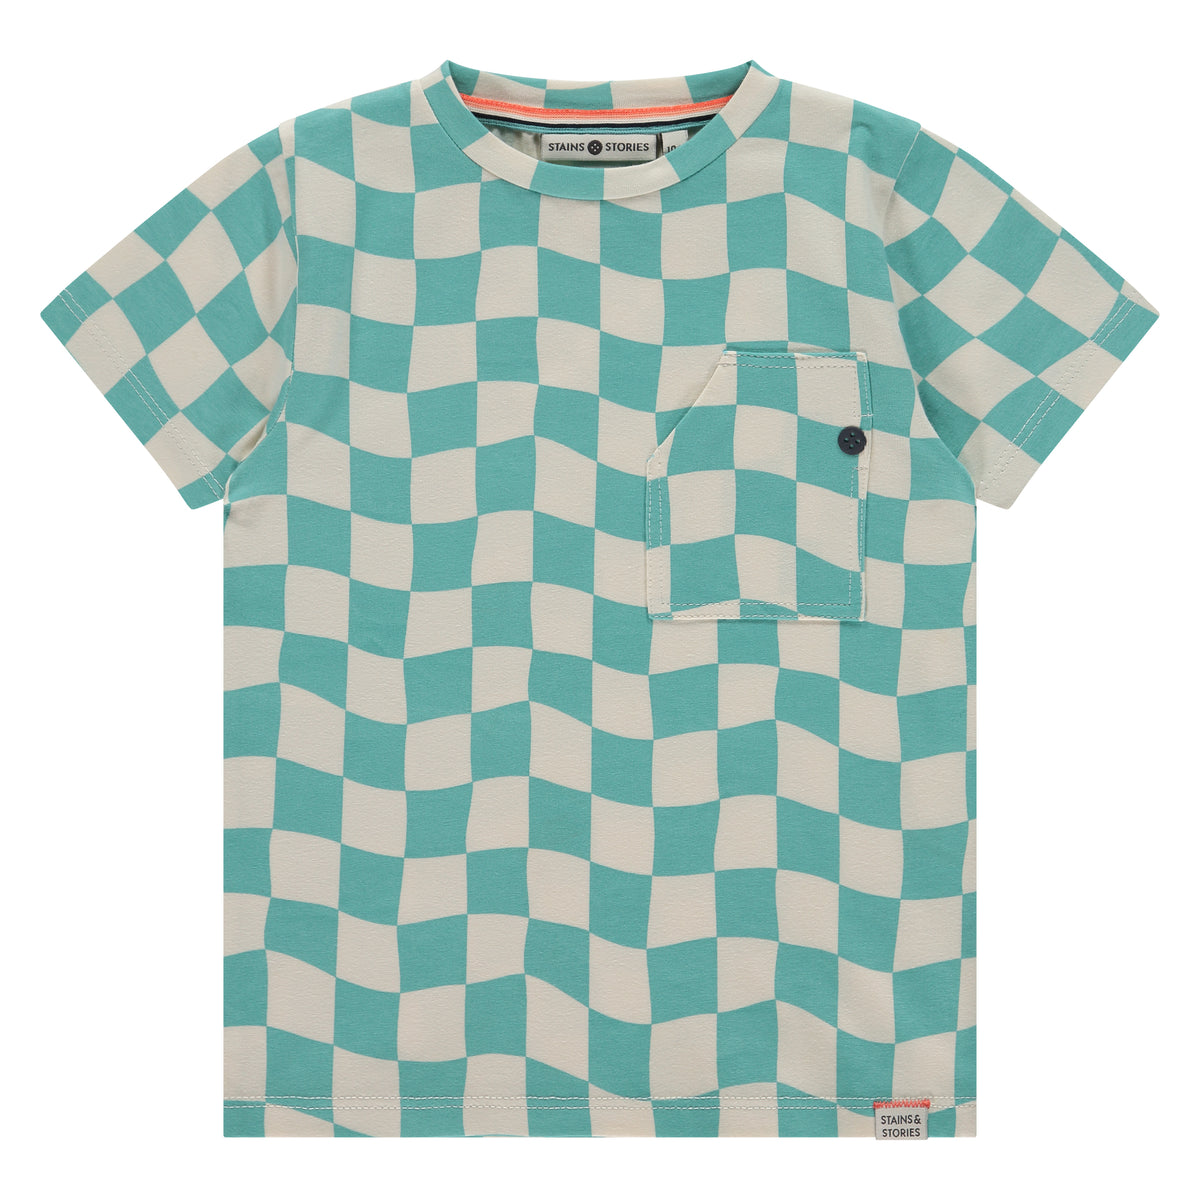 Boys T-shirt turquoise, Stains & Stories